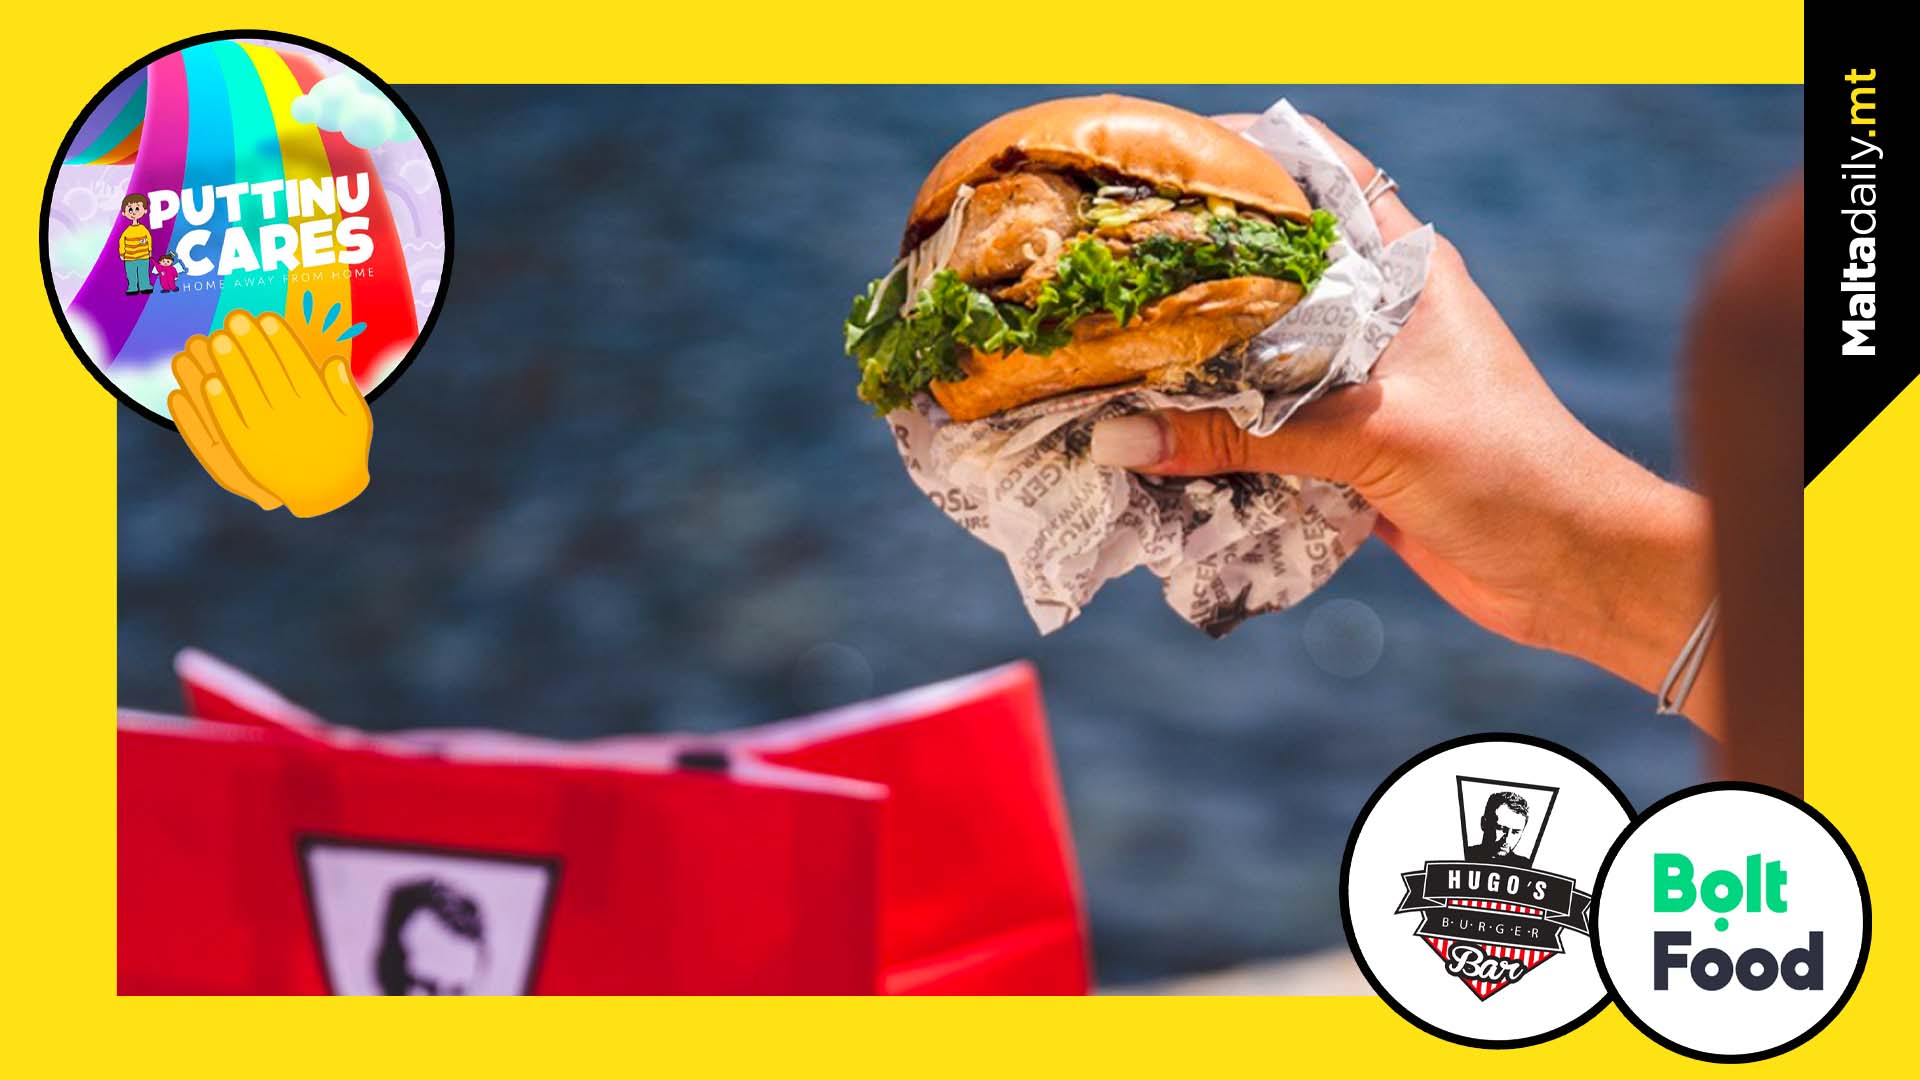 €1 to Puttinu for each Bolt Food & Burger Bar order placed on April 6th